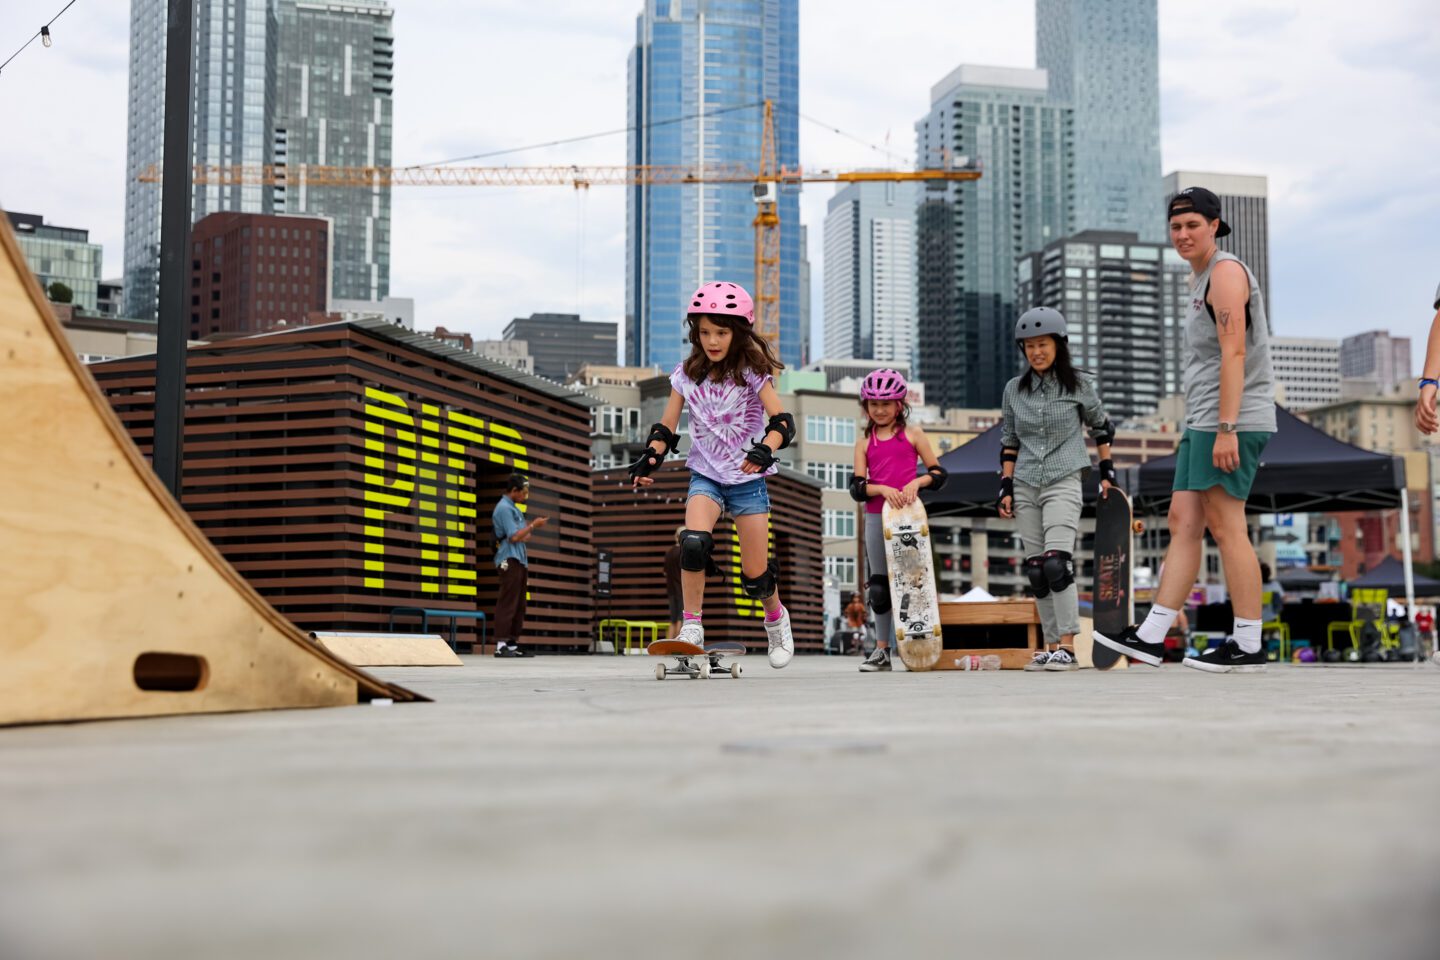 Skate Like a Girl happens select Tuesdays this summer. A girl gets ready to skateboard up a ramp while others look on. 2022 photo by Adam Lu.